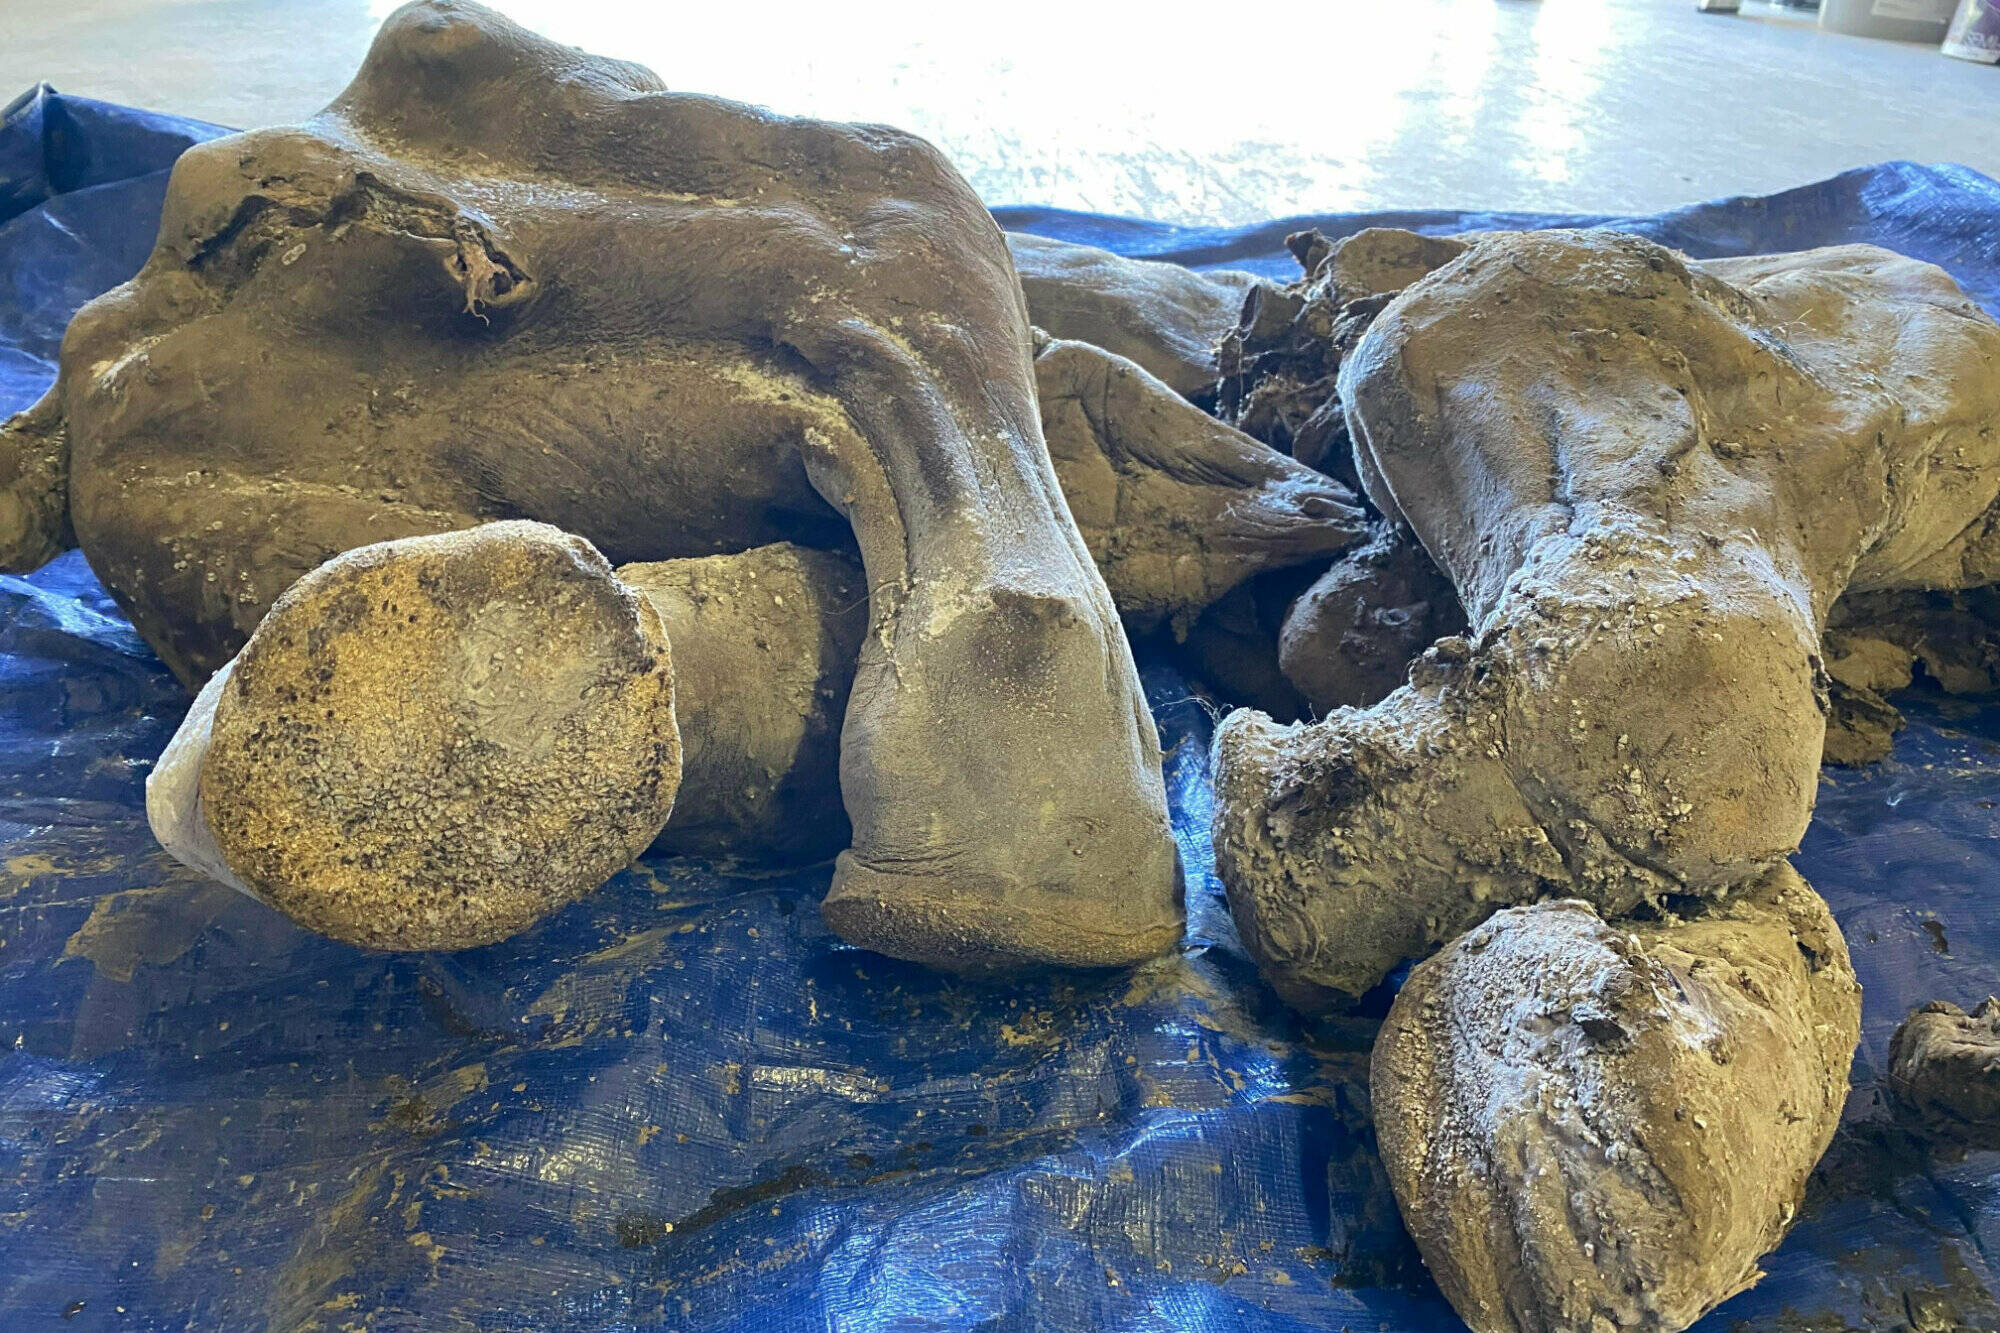 The preservation of the woolly mammoth calf is so complete that foot pads and nails remain. (Yukon Government/Submitted)